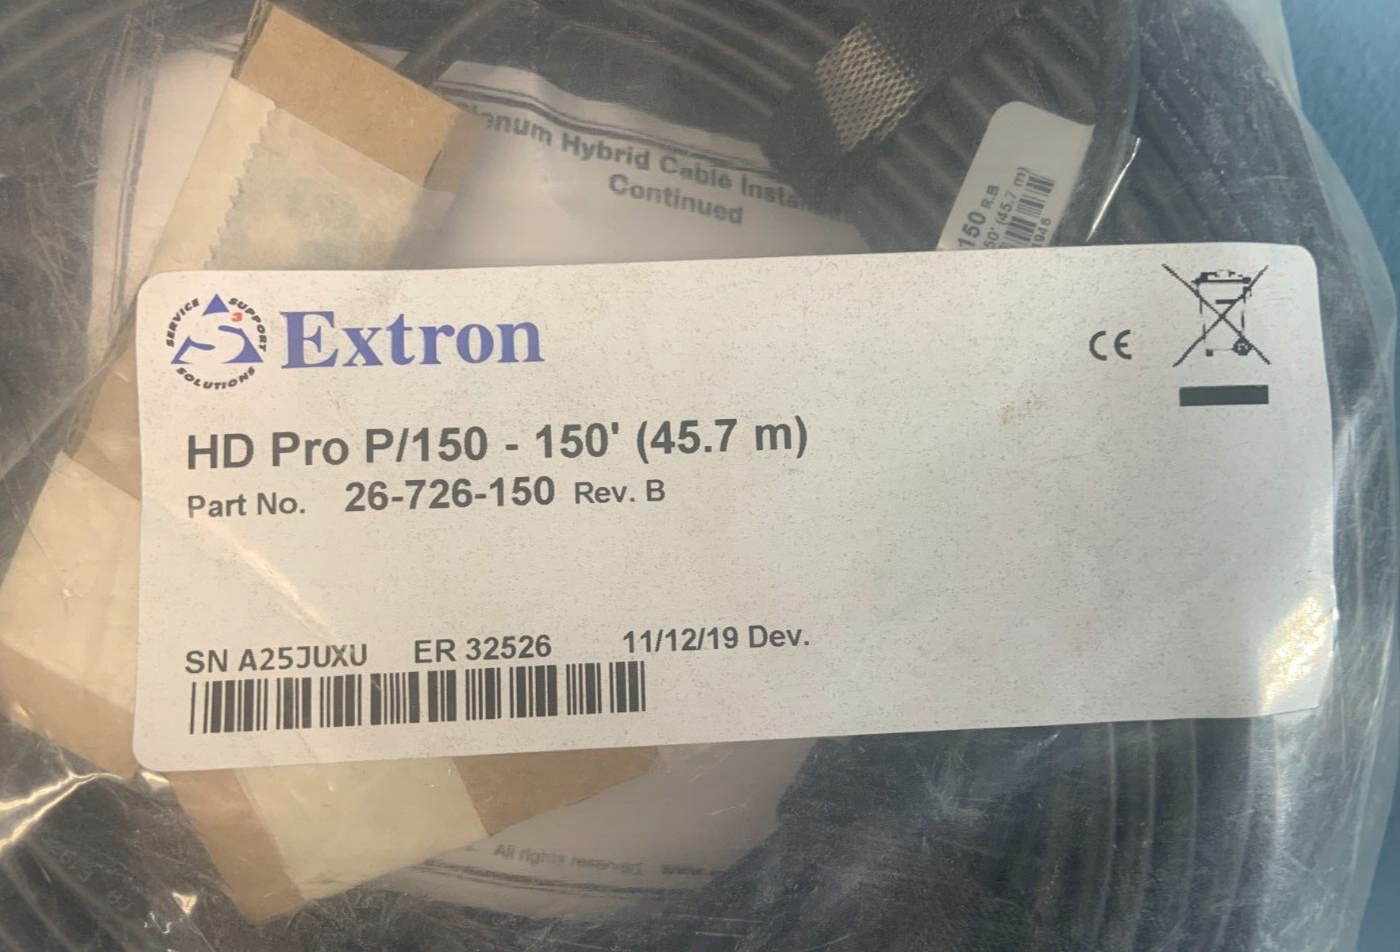 Extron HD ProP HDMI Premium High Speed Optical Cable 150' (45.7 m) | 26-726-150